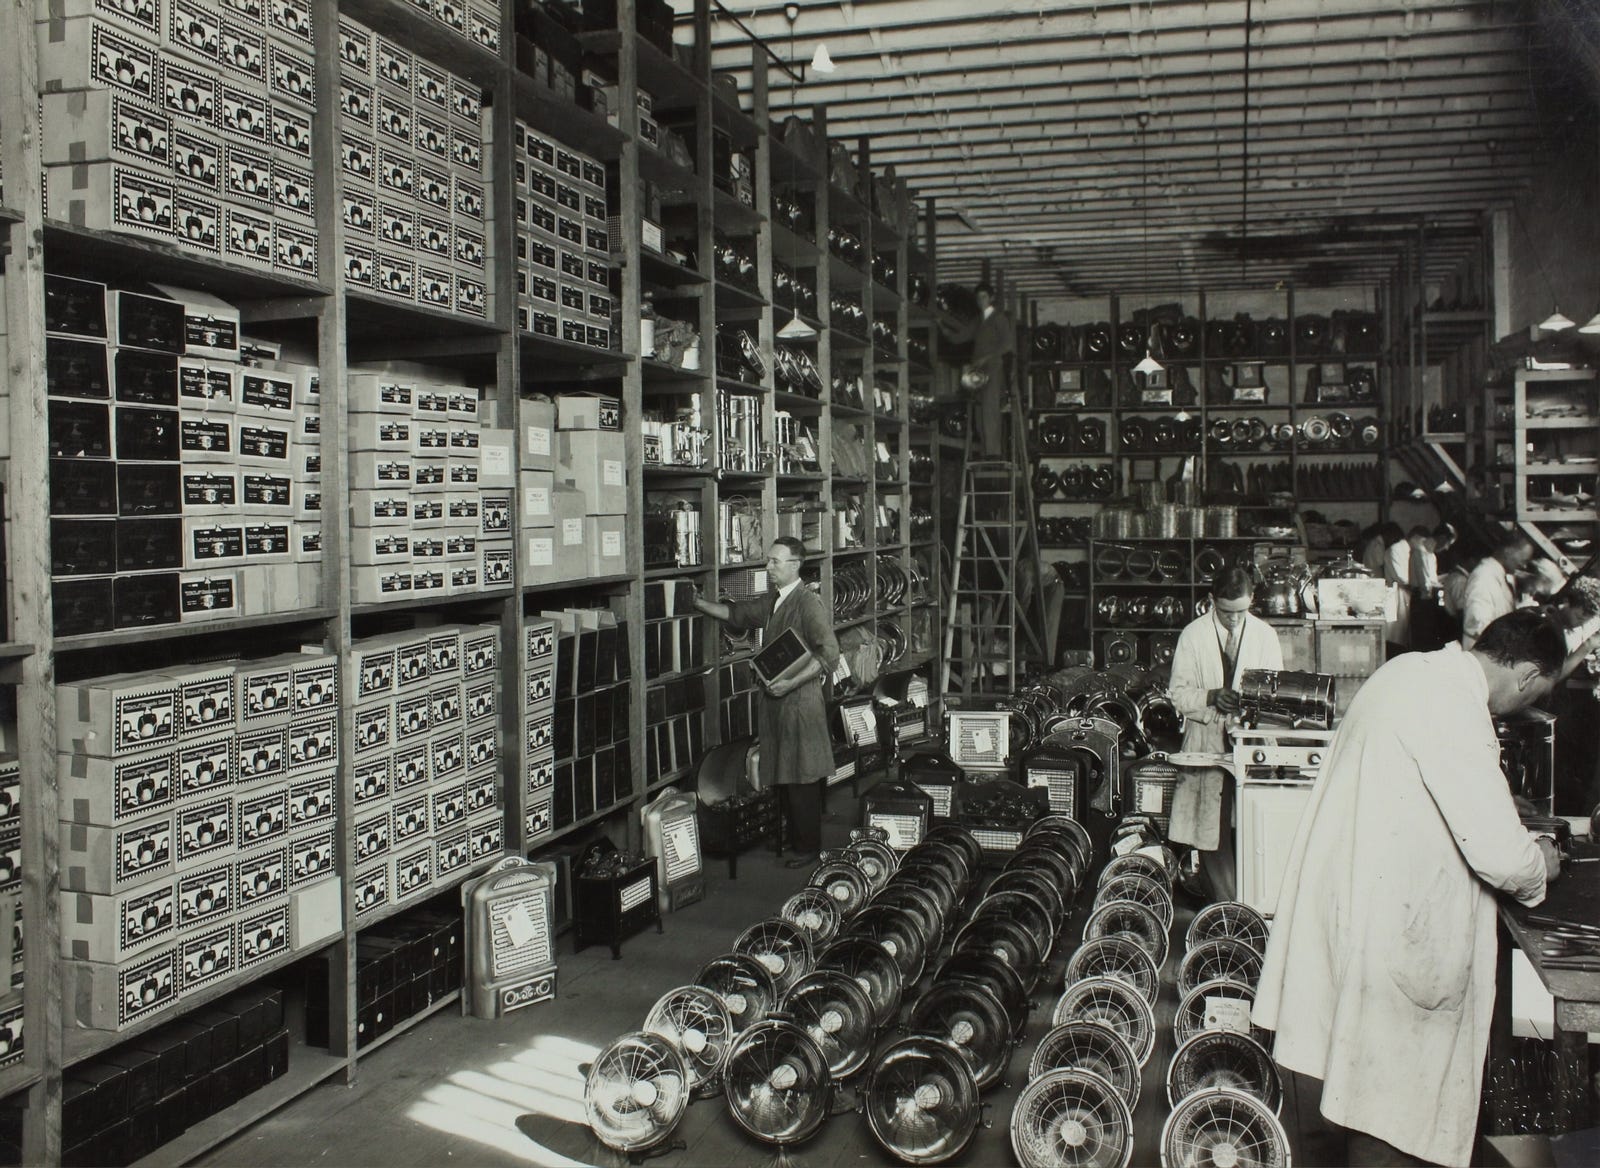 A black and white image of a small historical factory. Kaizen encourages input from any employee. One can be a factory worker or a C-suite member and contribute.